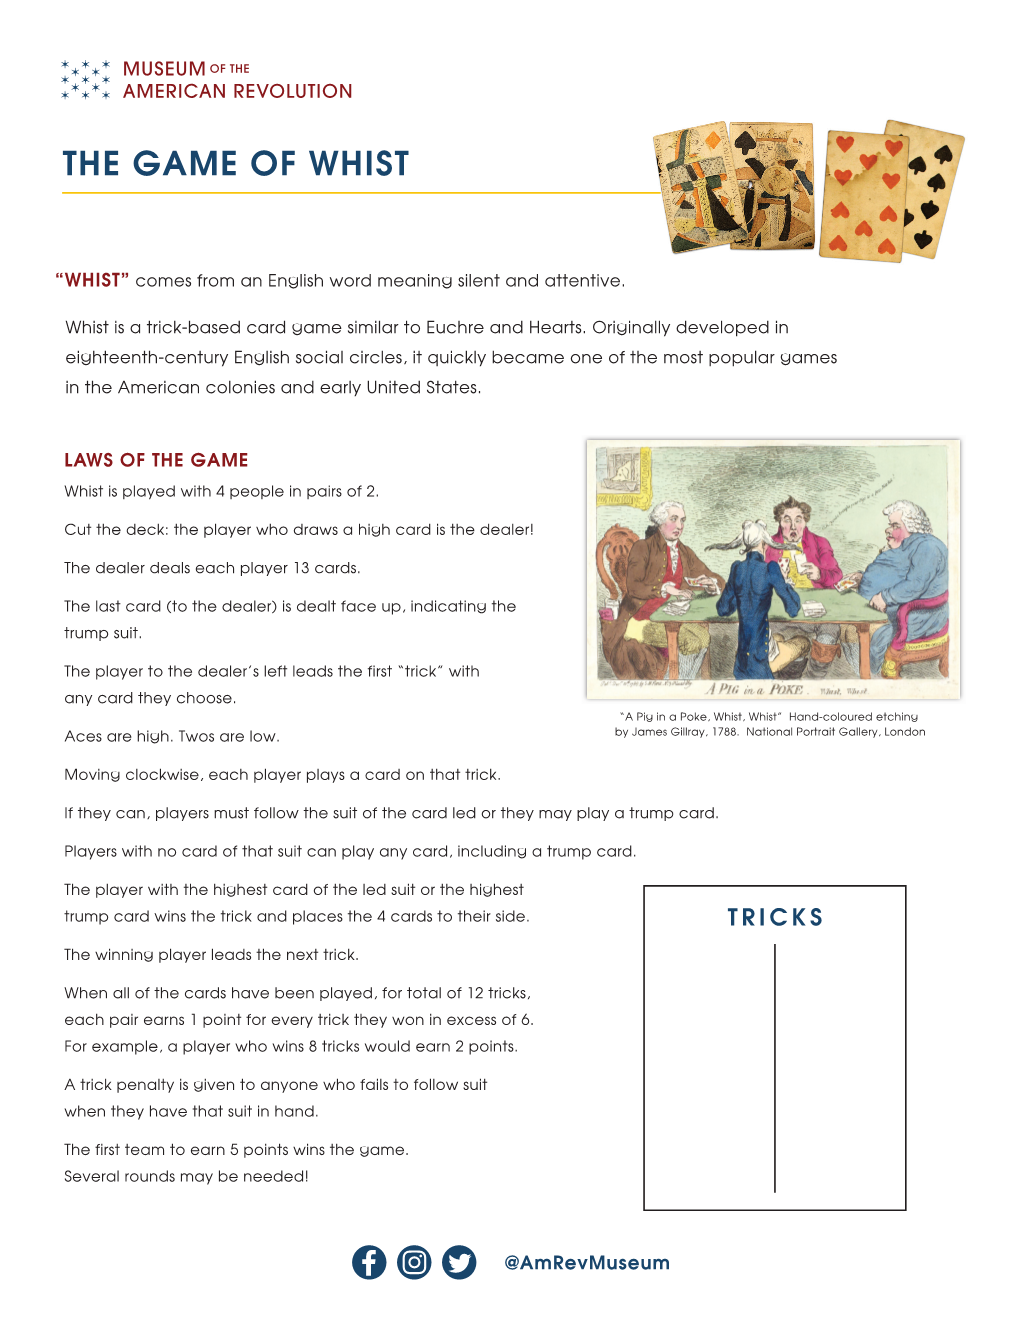 The Game of Whist